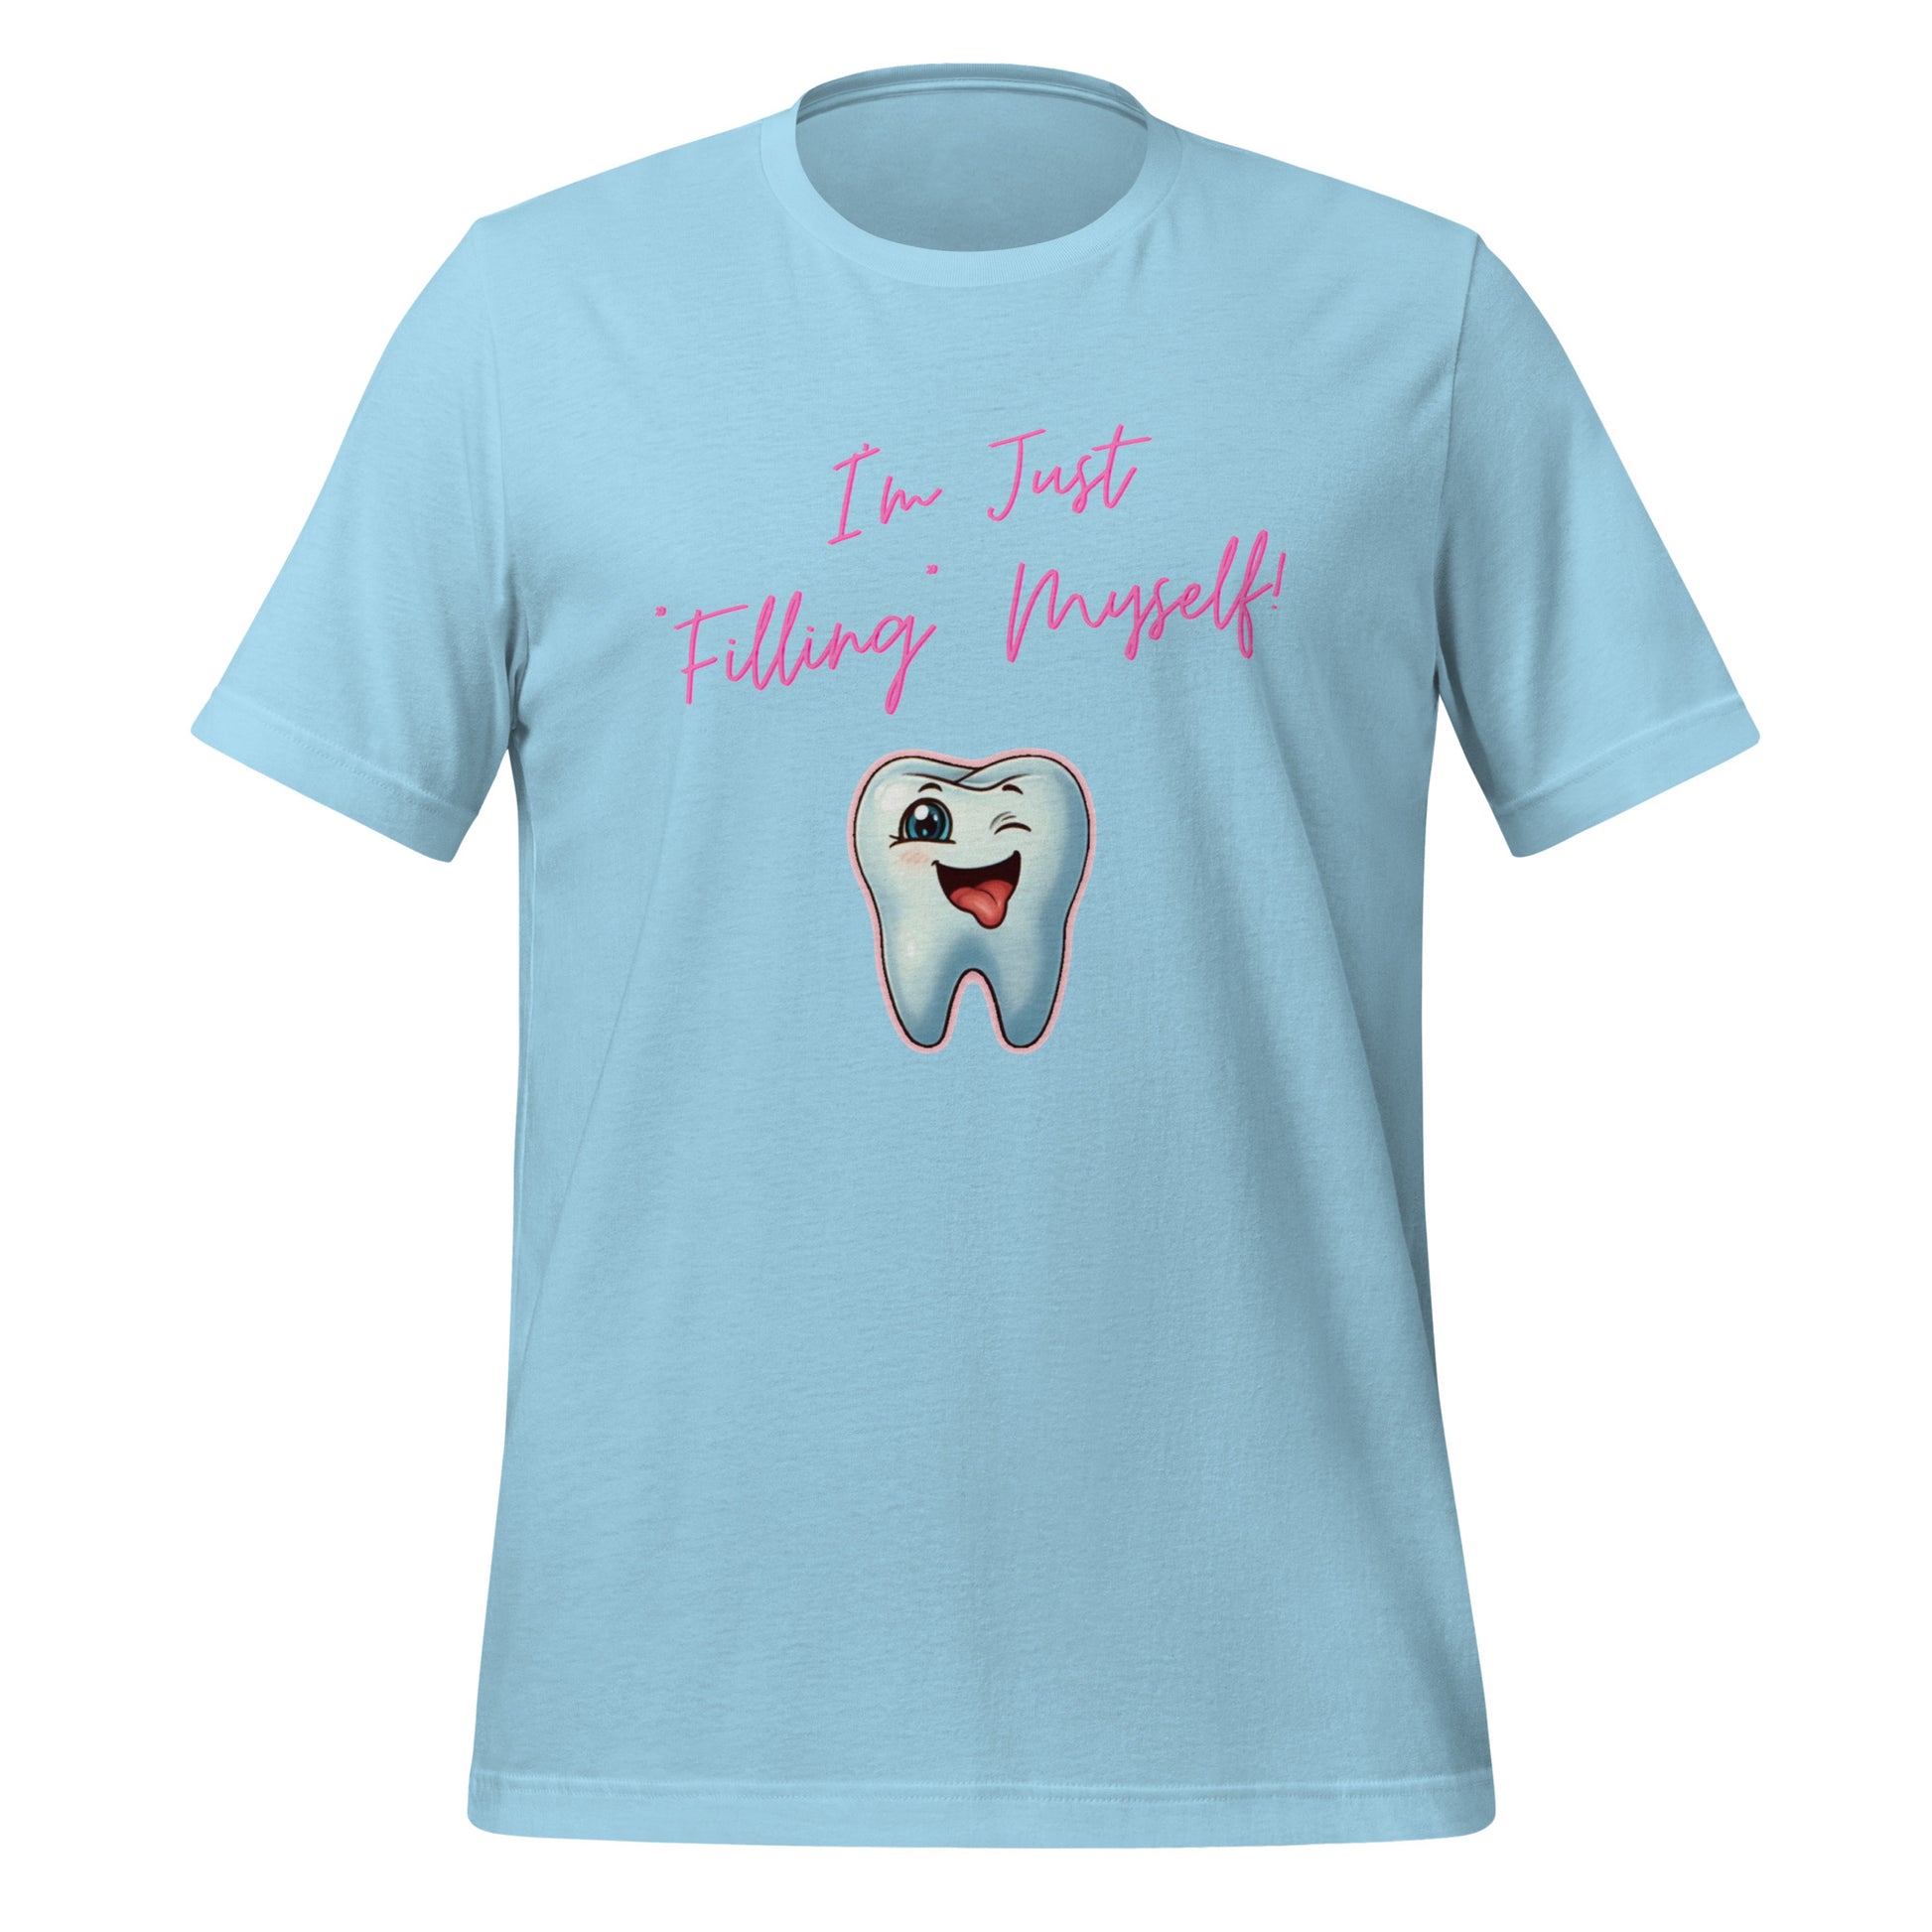 Flirtatious winking cartoon tooth character with the phrase "I'm just filling myself!" Ideal for a funny dental t-shirt or a cute dental assistant shirt. Ocean blue color. 